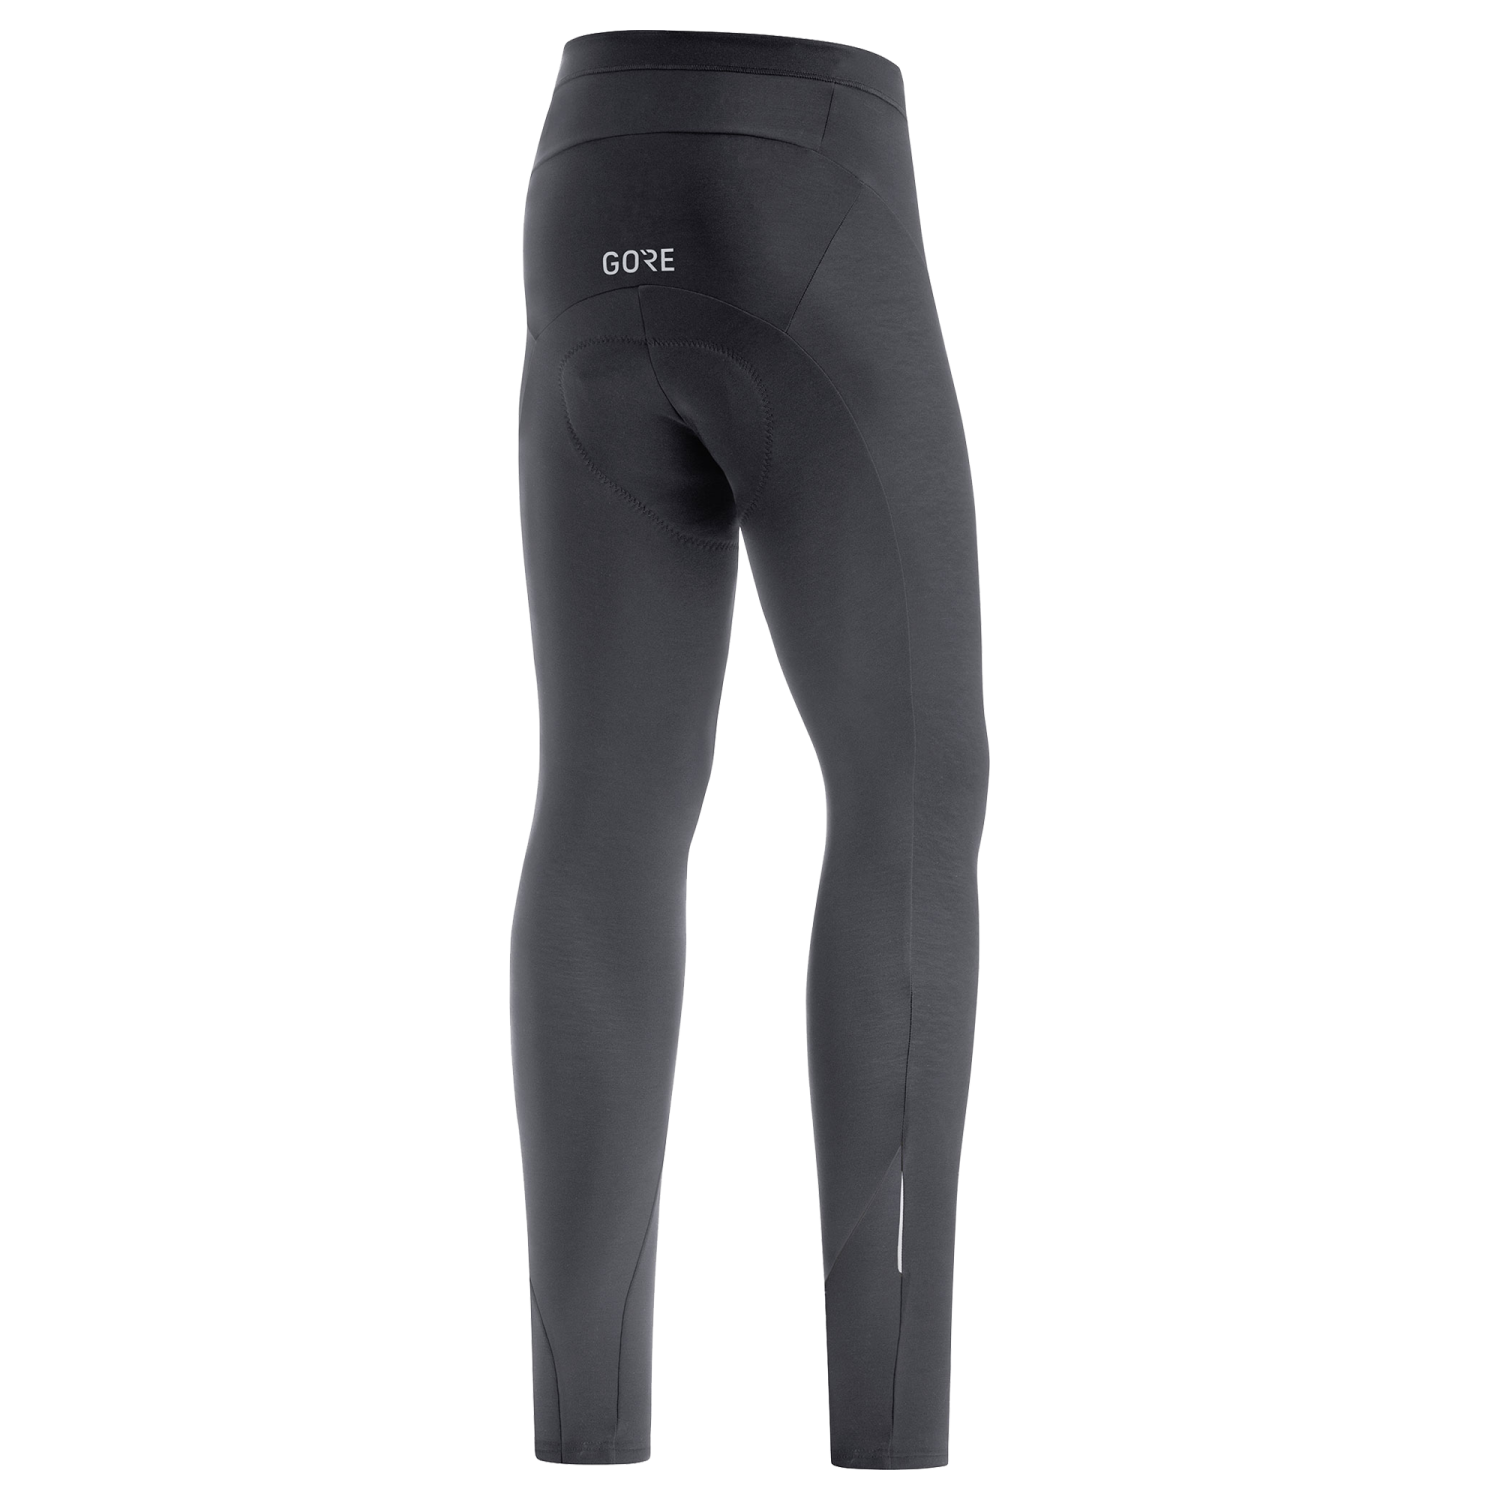 GOREWEAR C3 Thermo - Cycling Tights with Pad Long tights